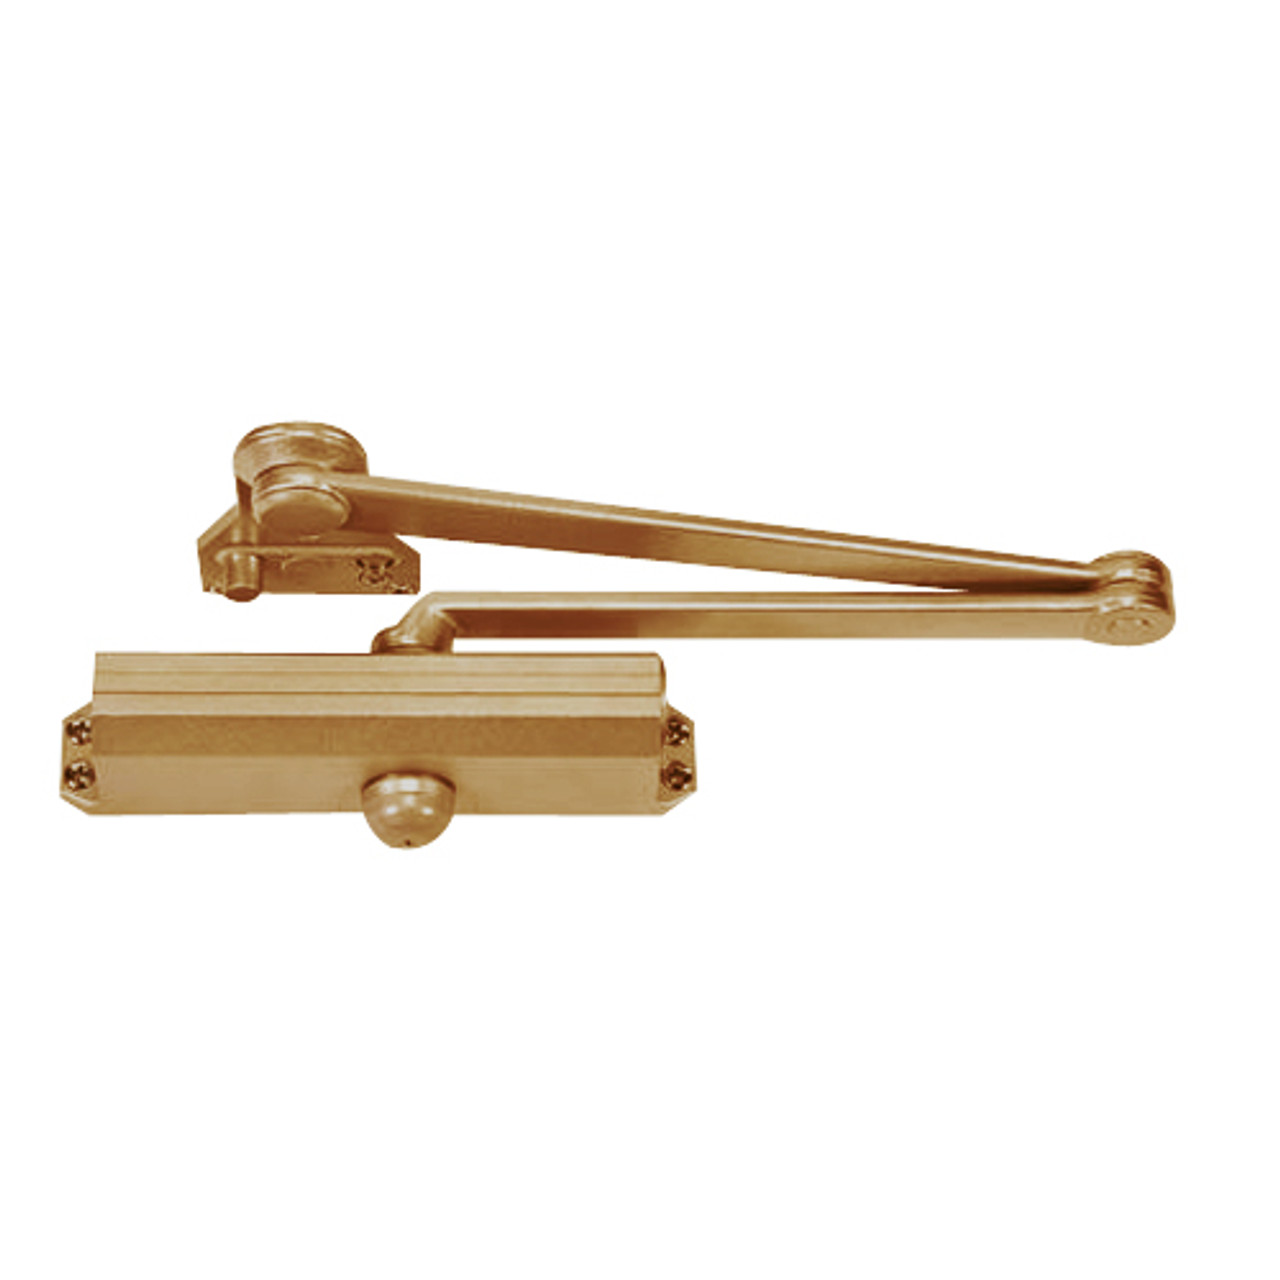 CPS1601T-691 Norton 1600 Series Hold Open Adjustable Door Closer with CloserPlus Spring Arm in Dull Bronze Finish